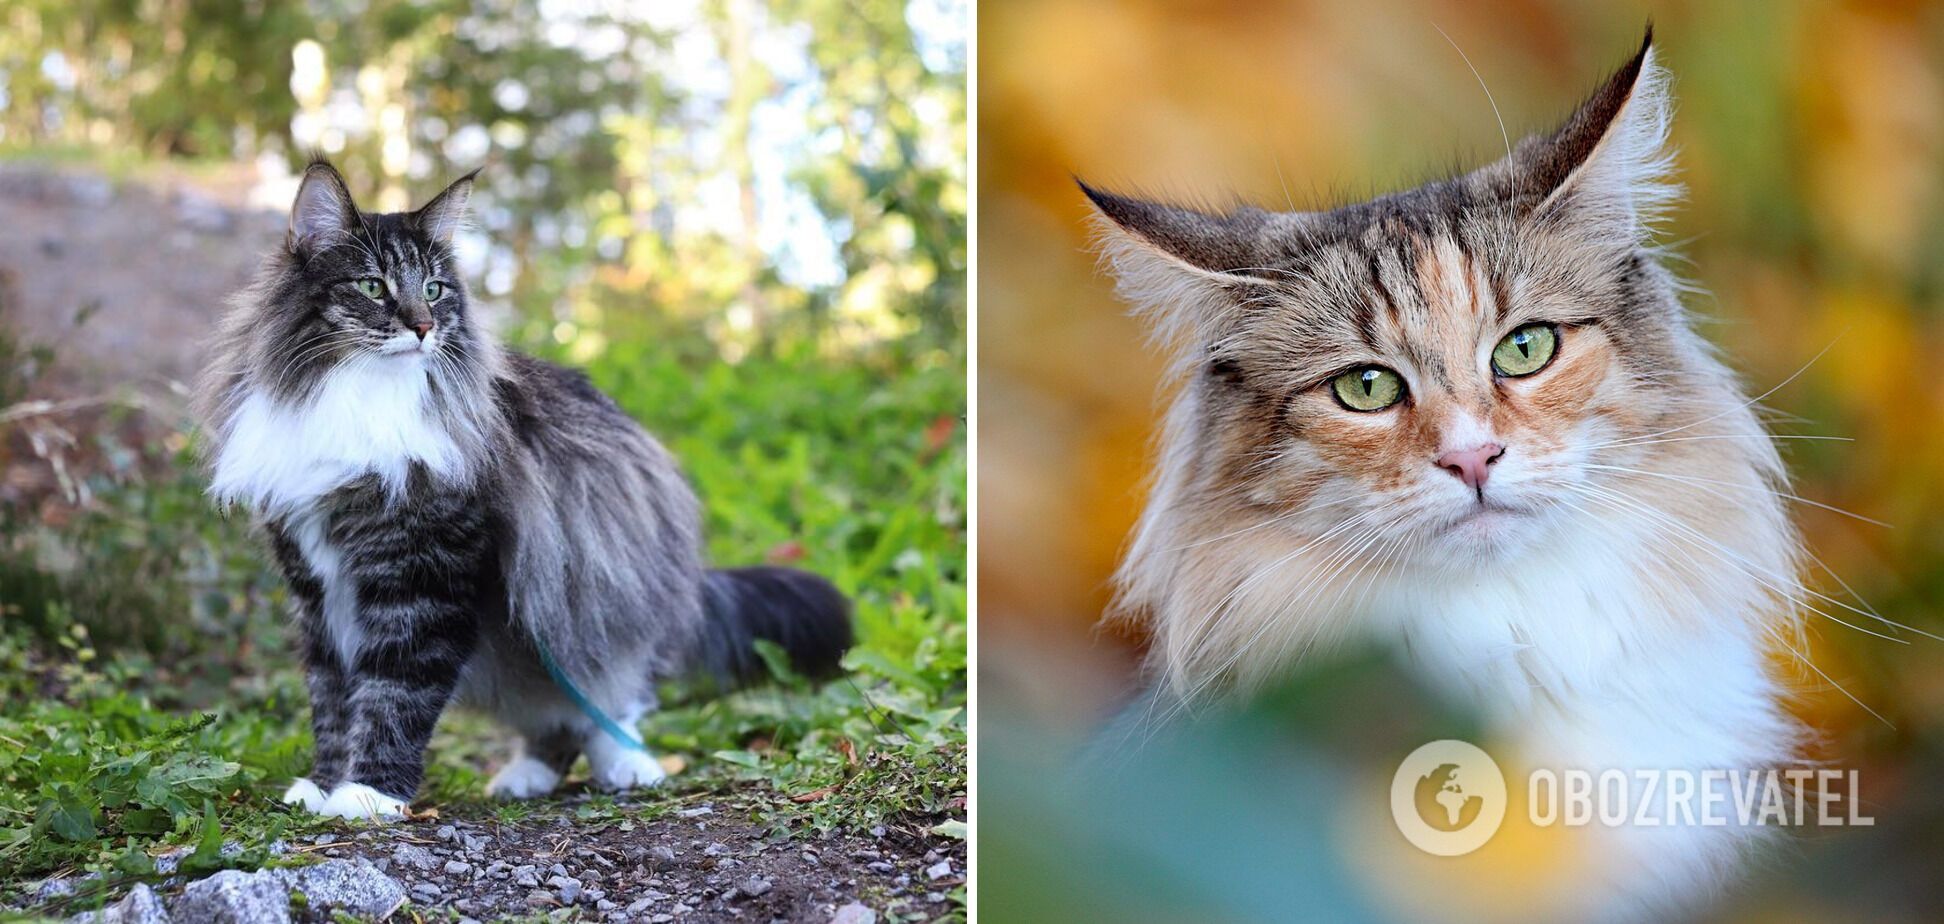 Delightful: which cat breeds are the most beautiful